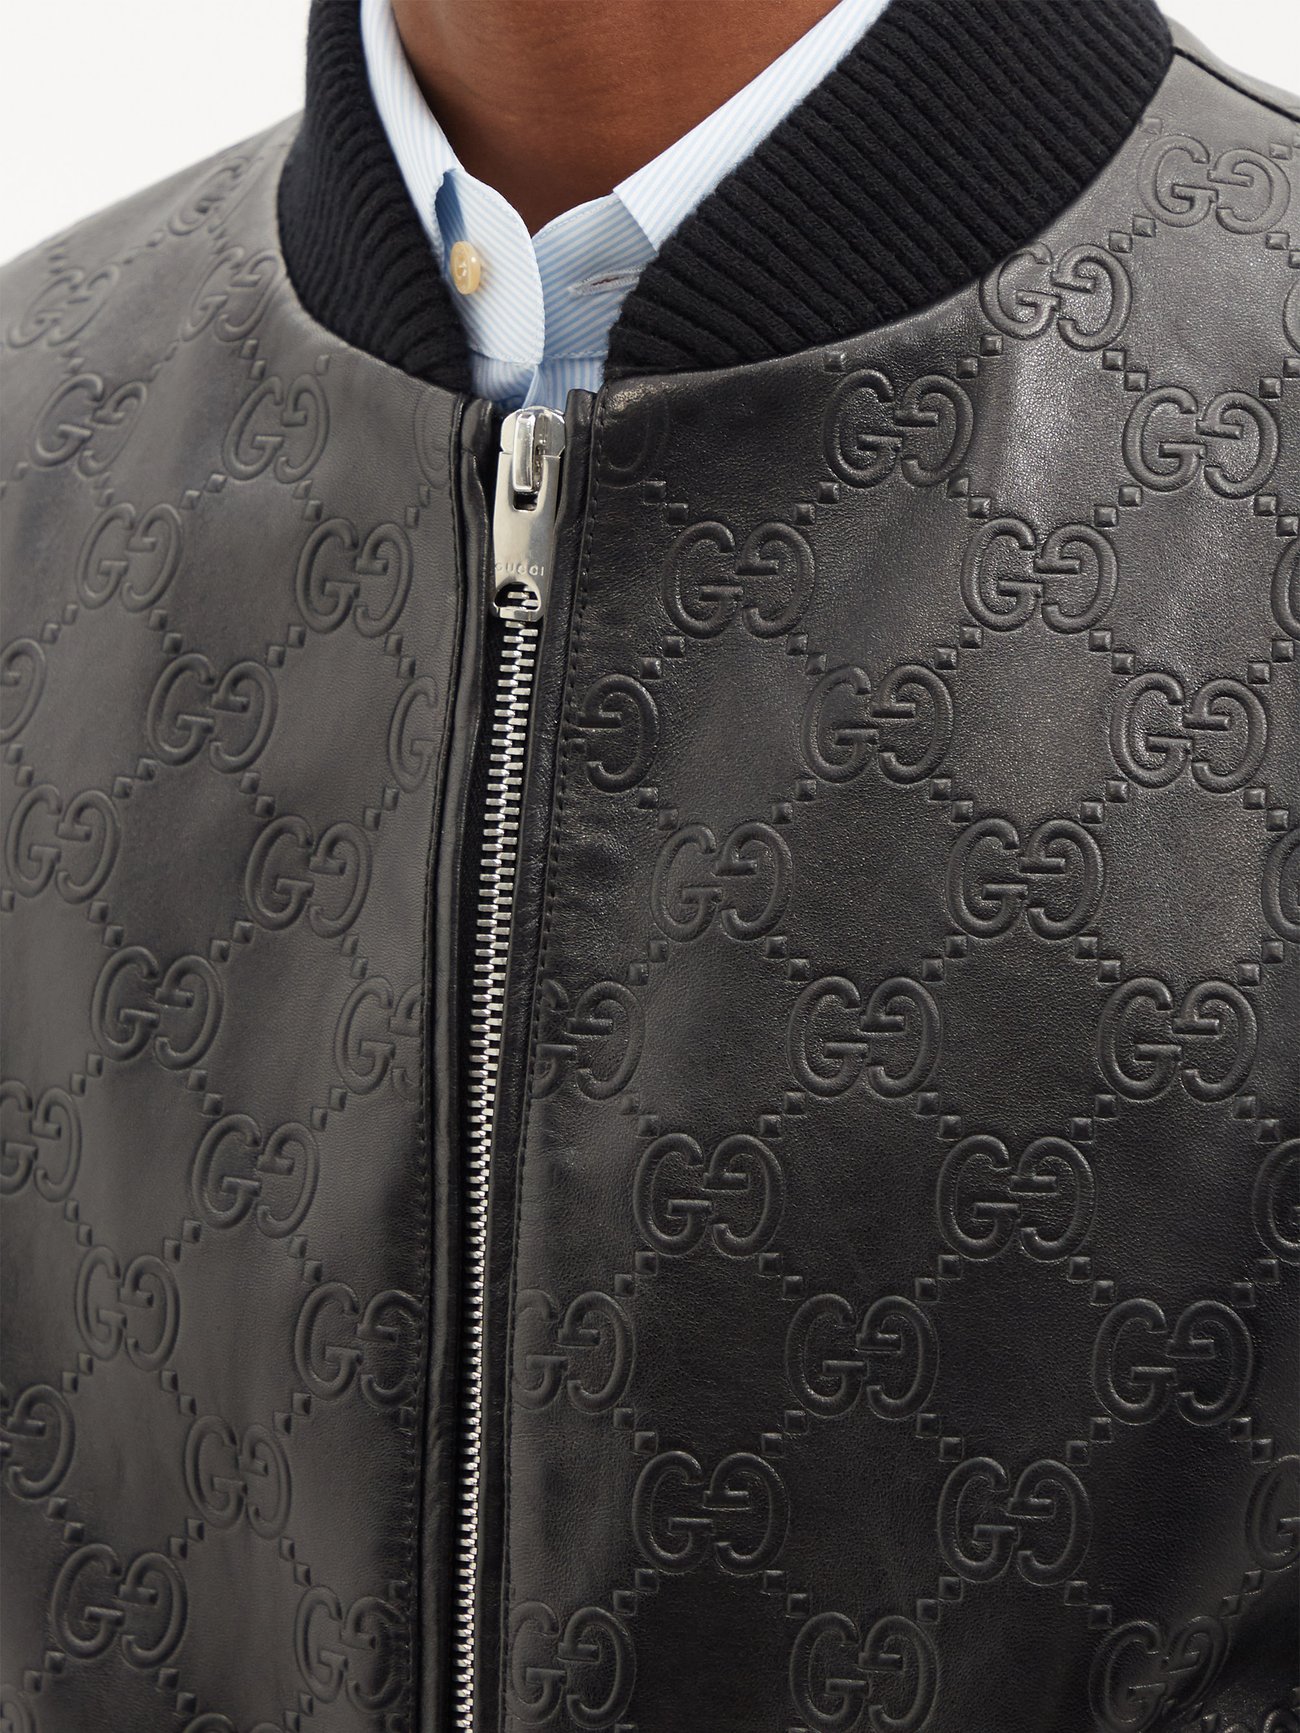 GG Leather Bomber Jacket in Blue - Gucci